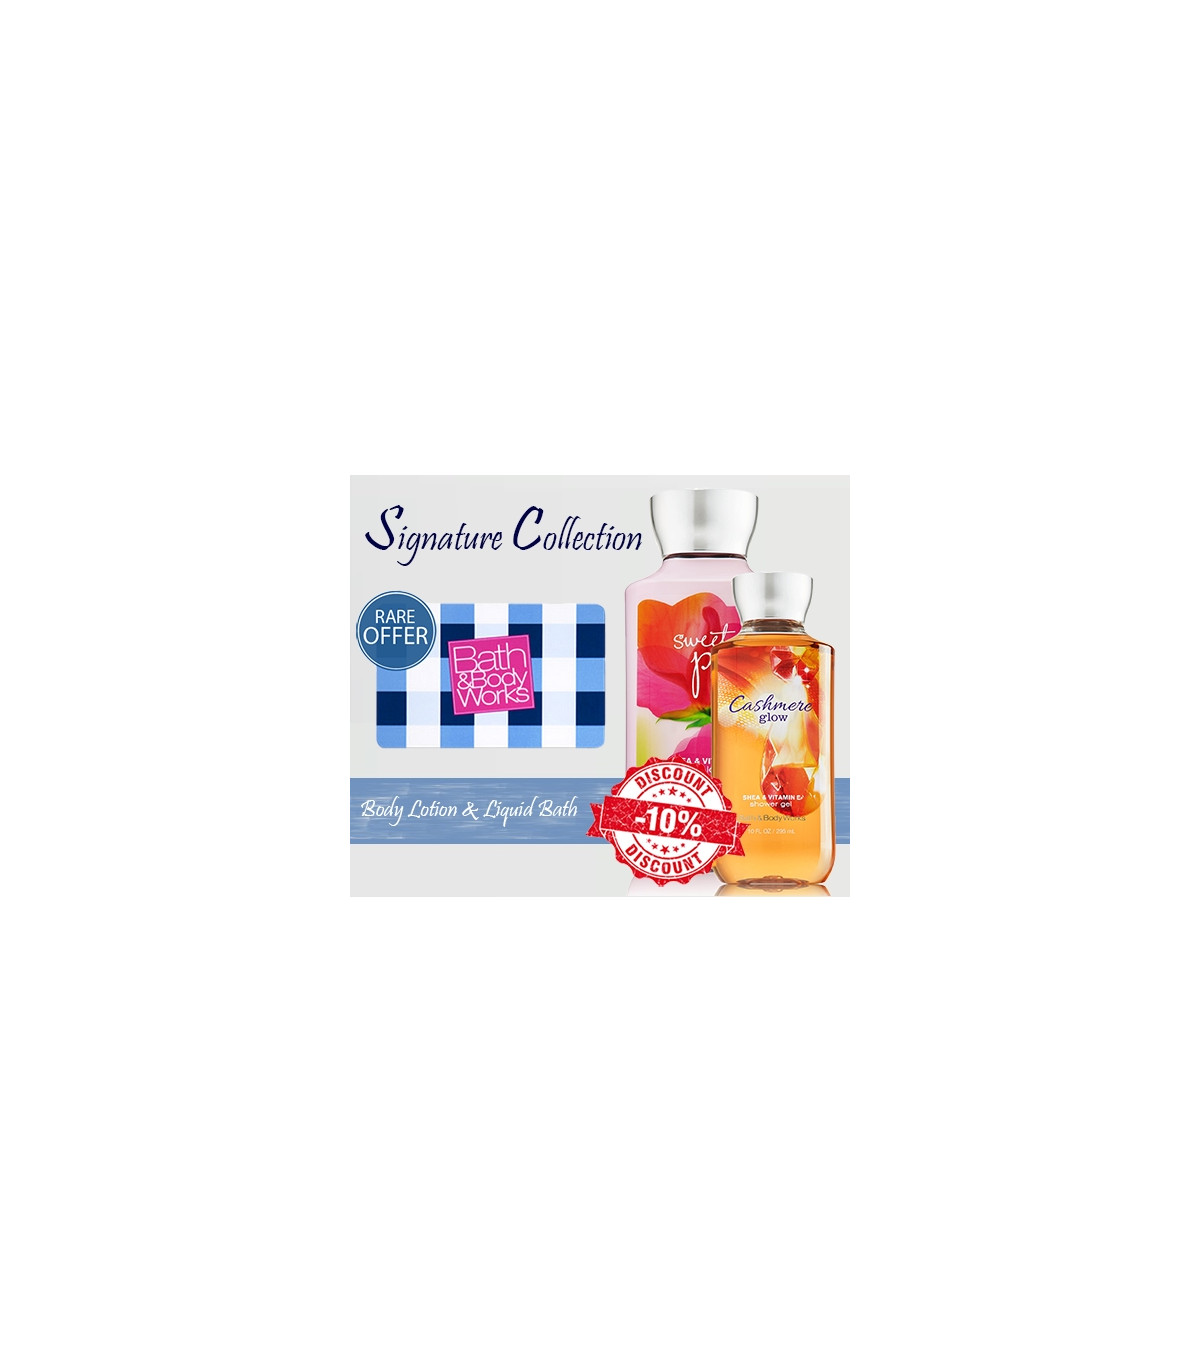 Bath & Body Works Signature Collection